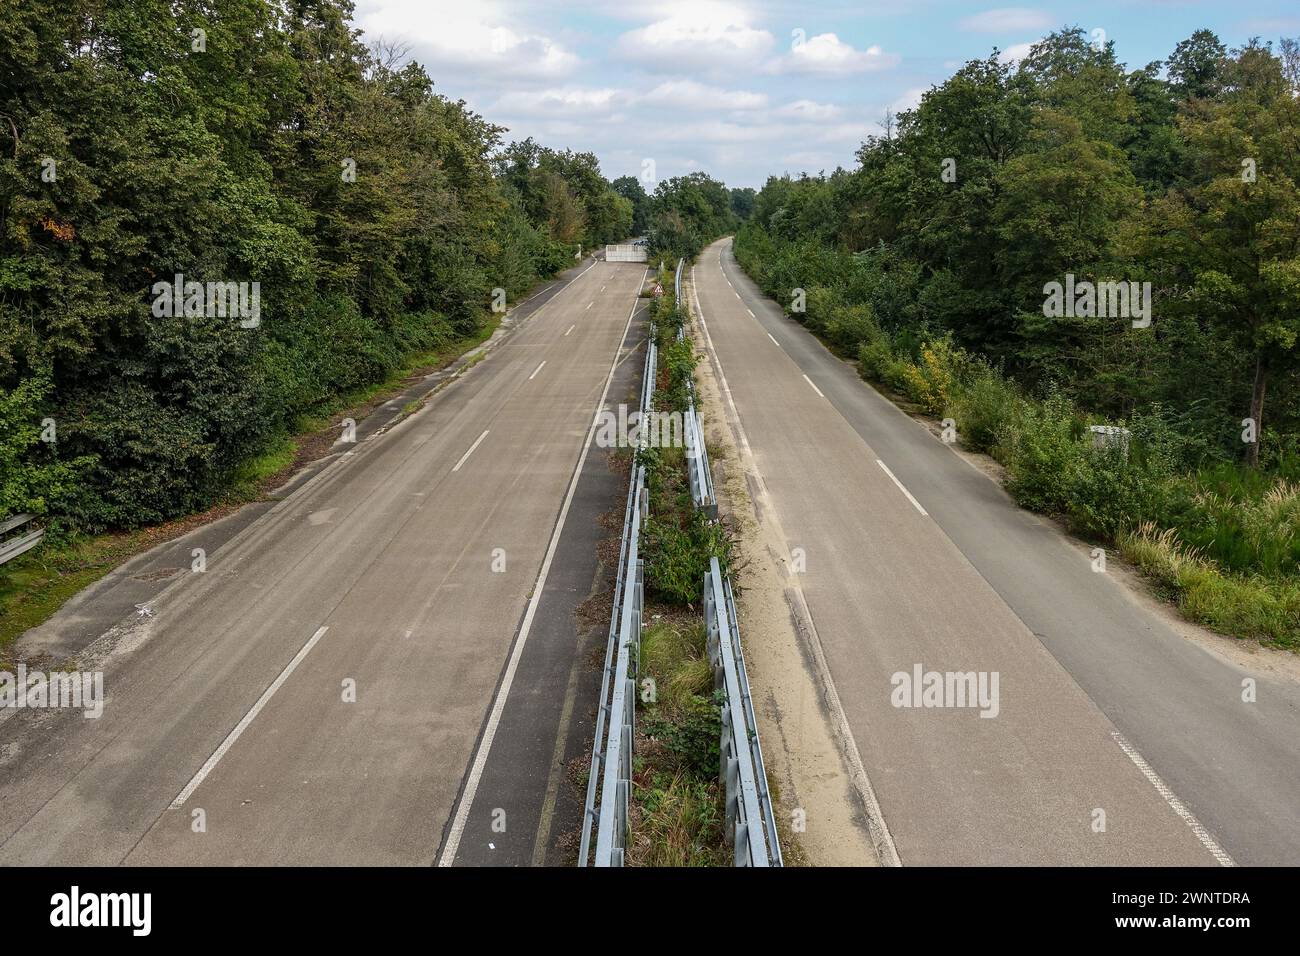 Empty, abandoned A4 autobahn (highway) in Germany, after it was displaced to make space for the surface coal mining operations of Tagebau Hambach Stock Photo